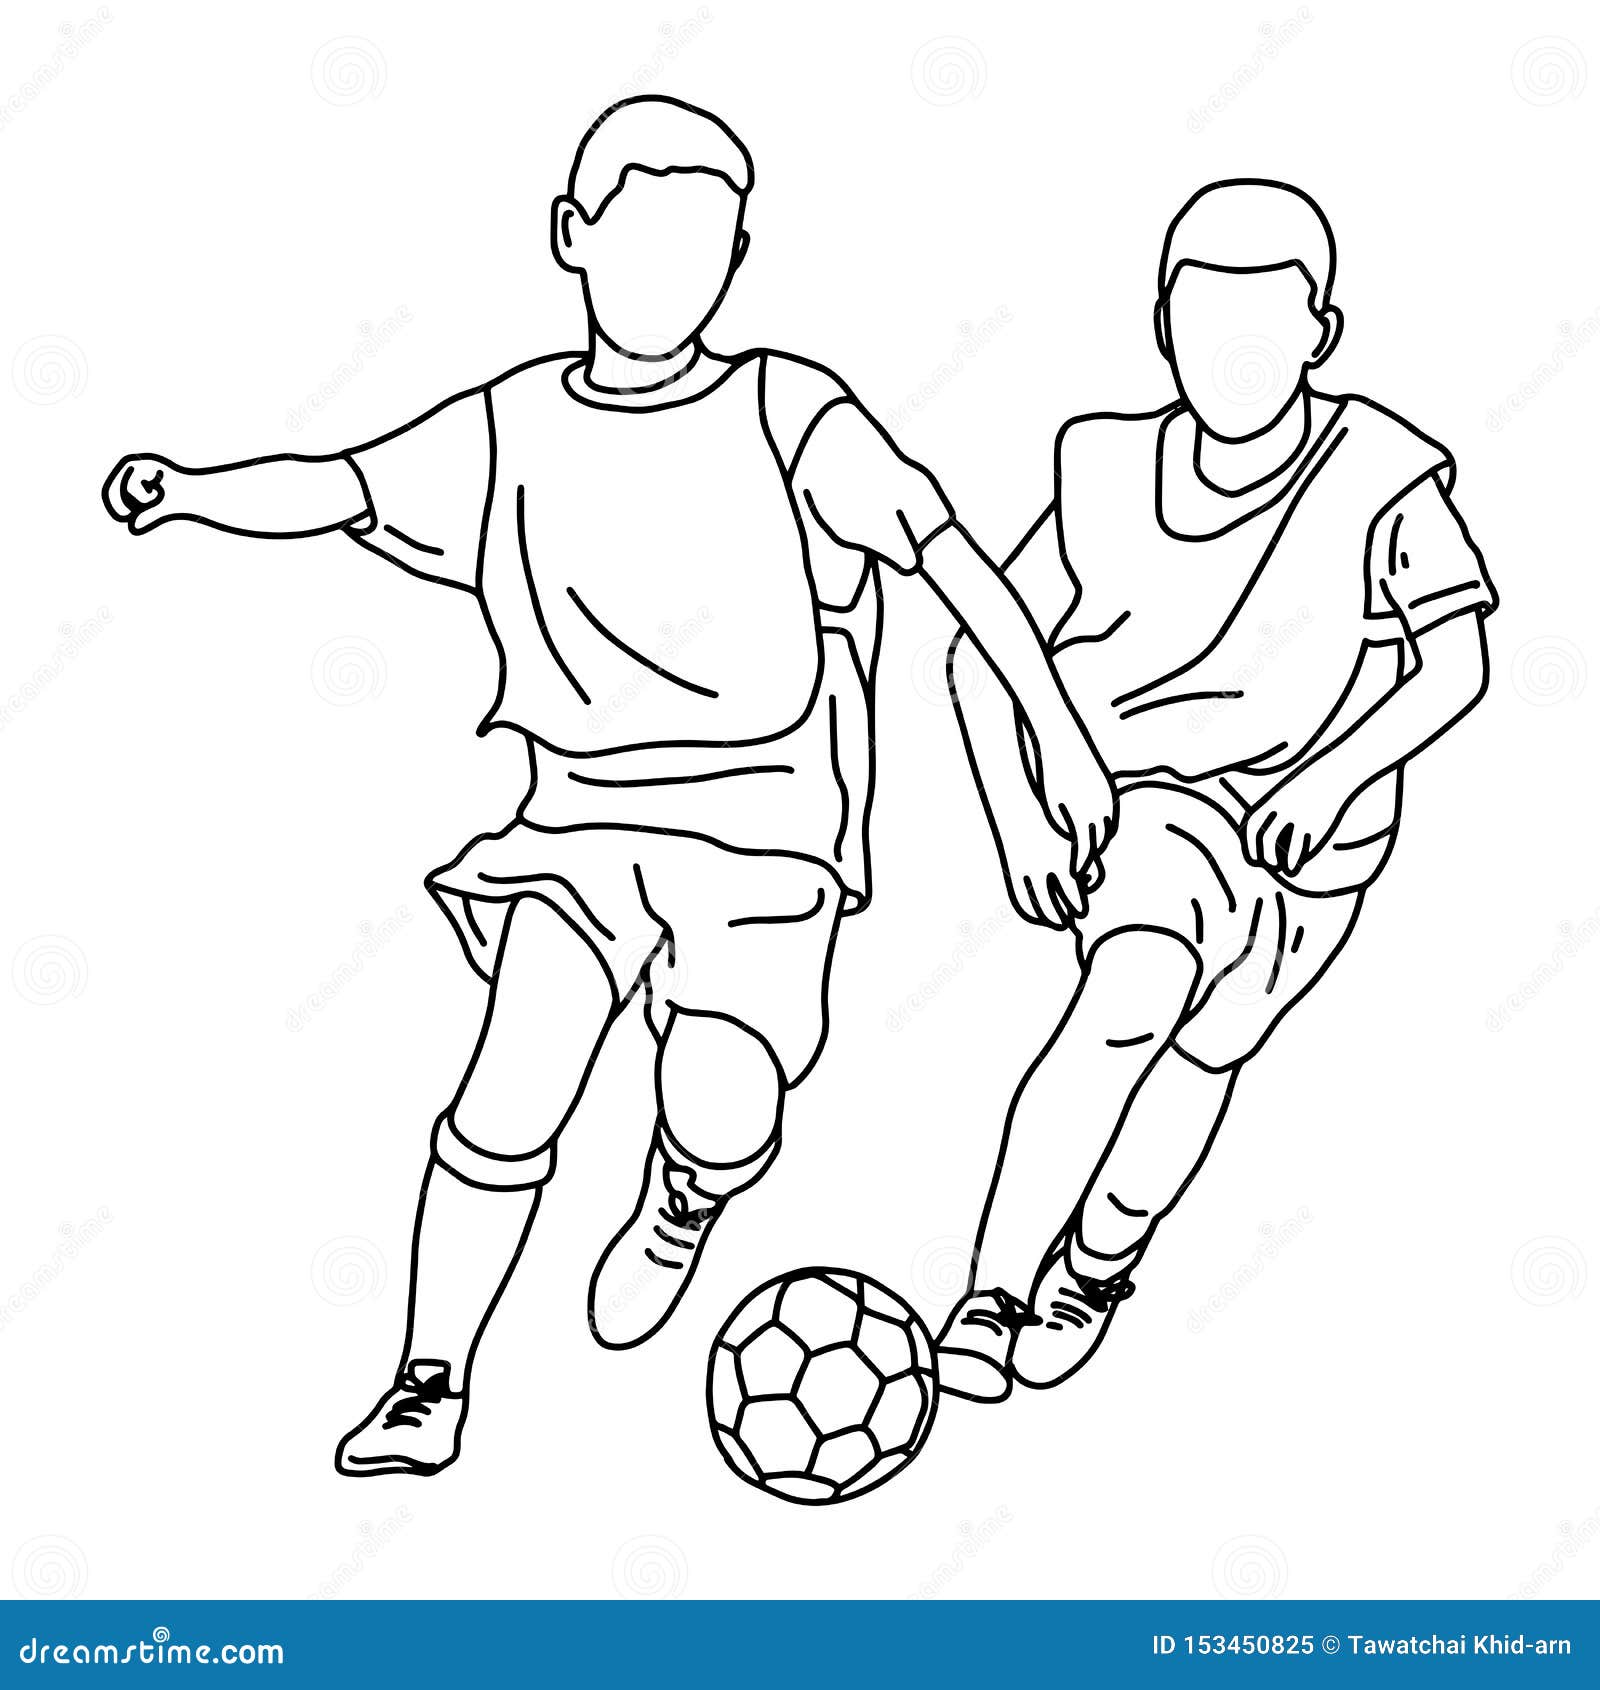 Download Two Boys Playing Soccer Together Vector Illustration ...